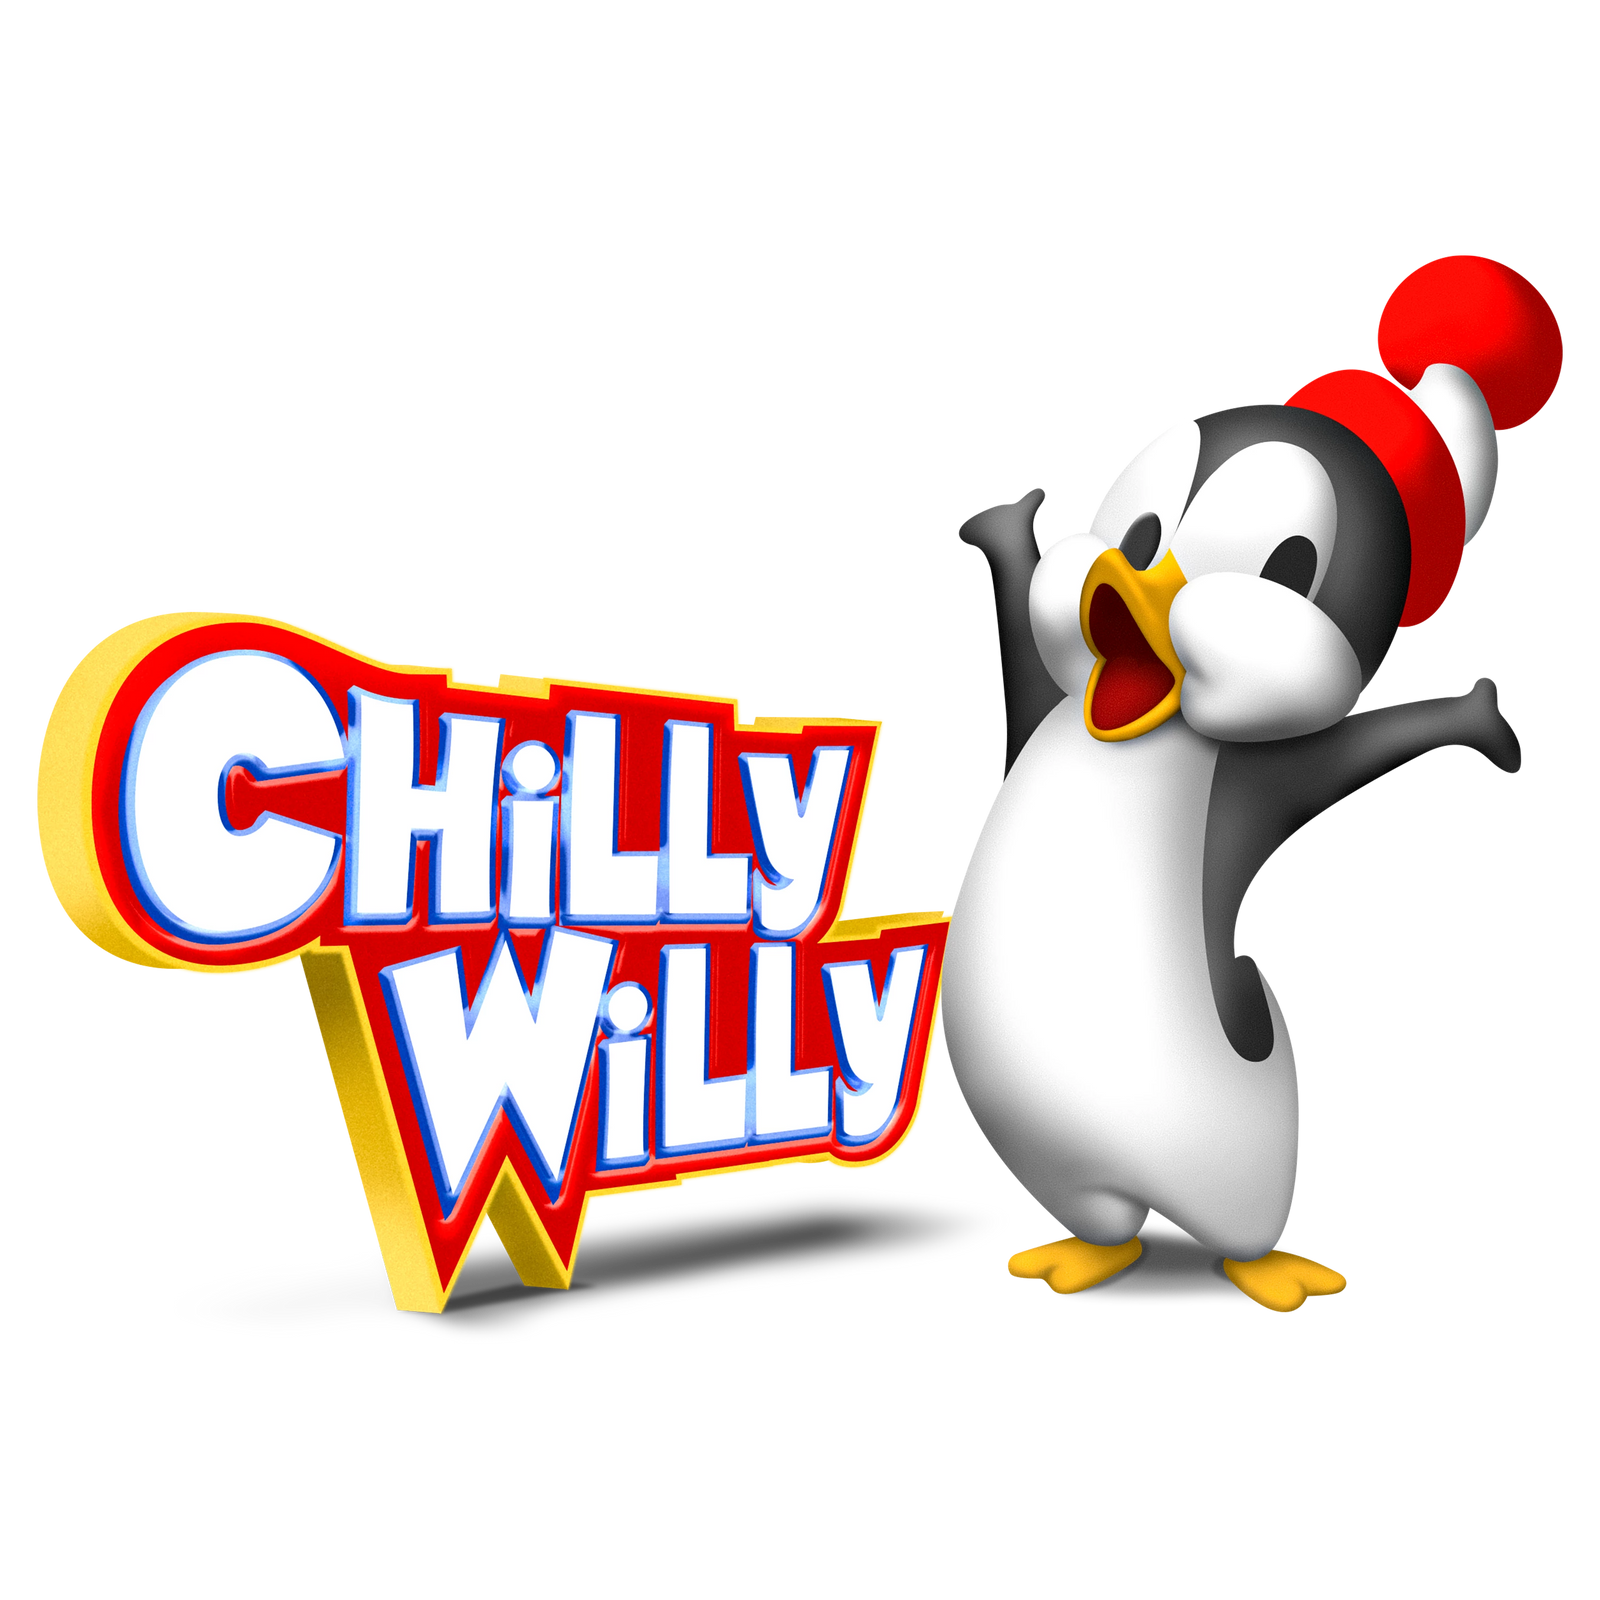 Chilly Willy logo.